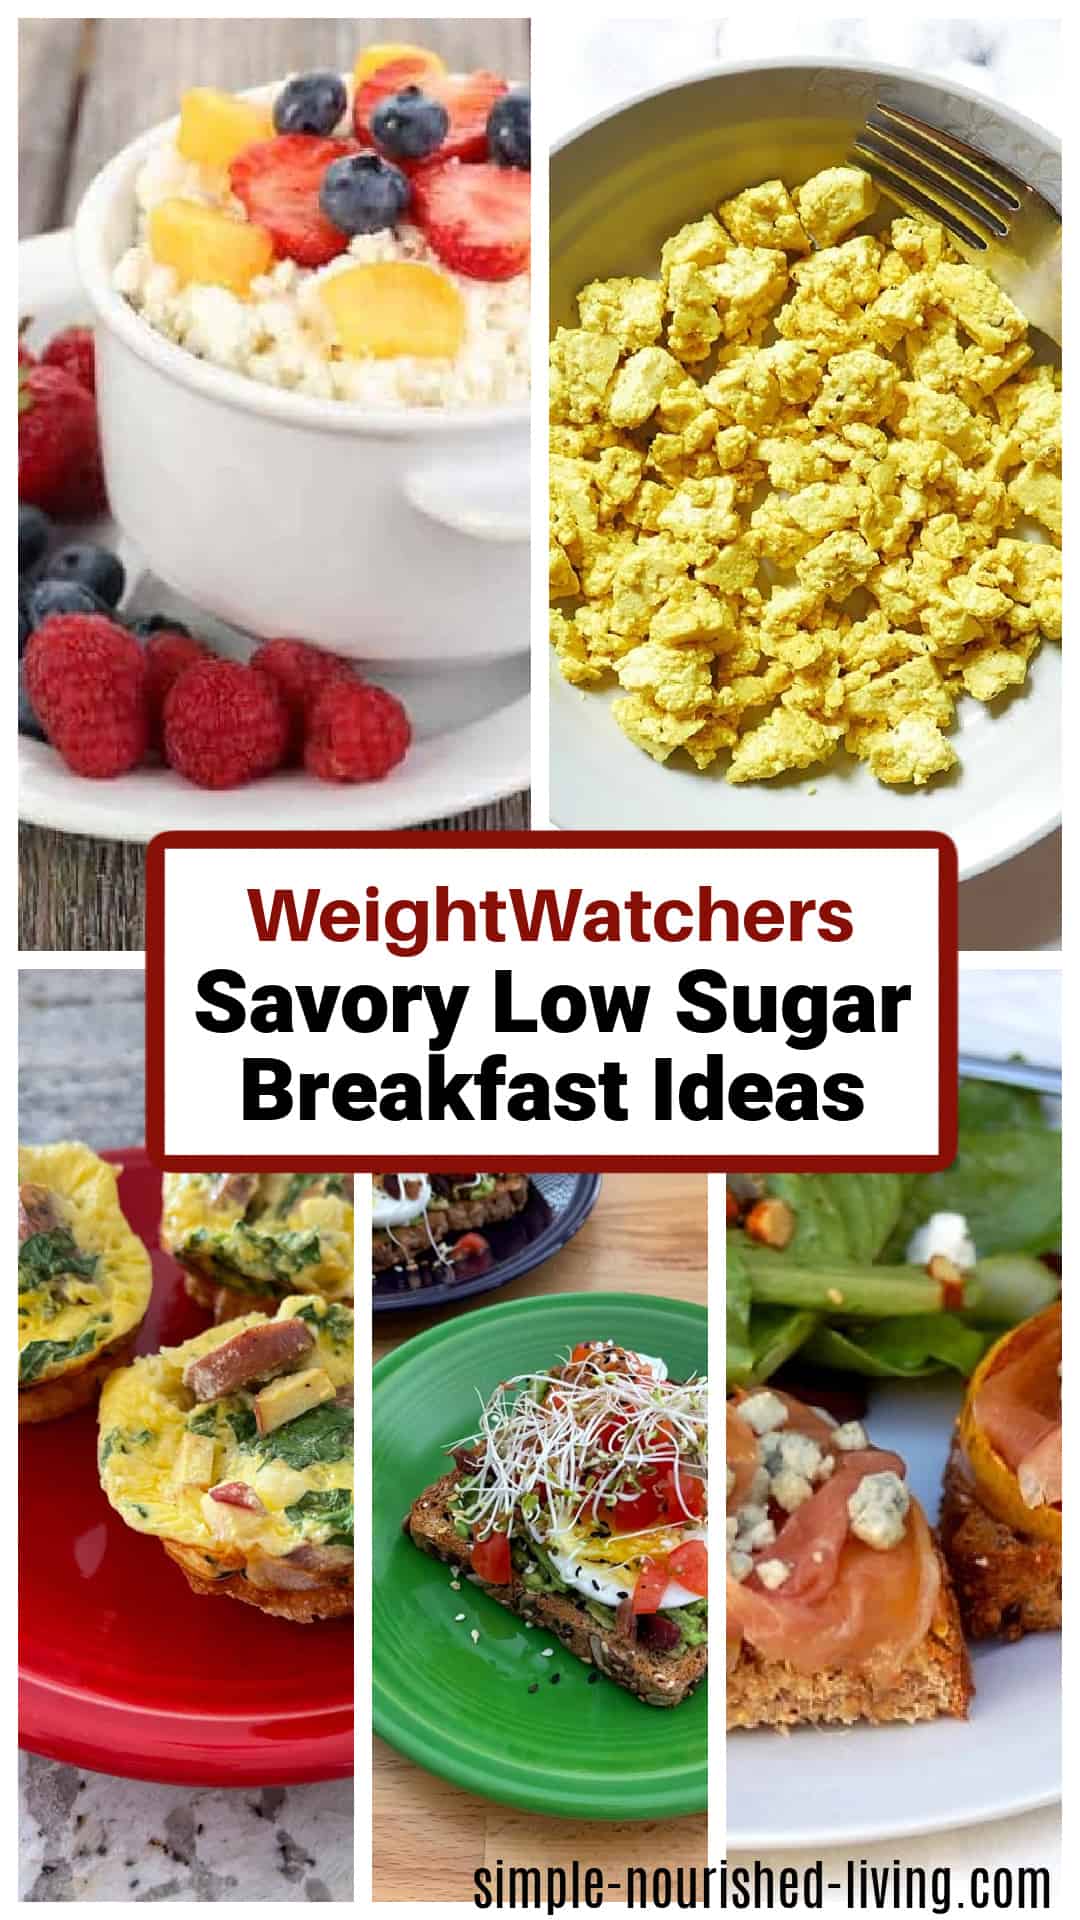 A collage of food photos featuring low sugar savory breakfast ideas for Weight Watchers